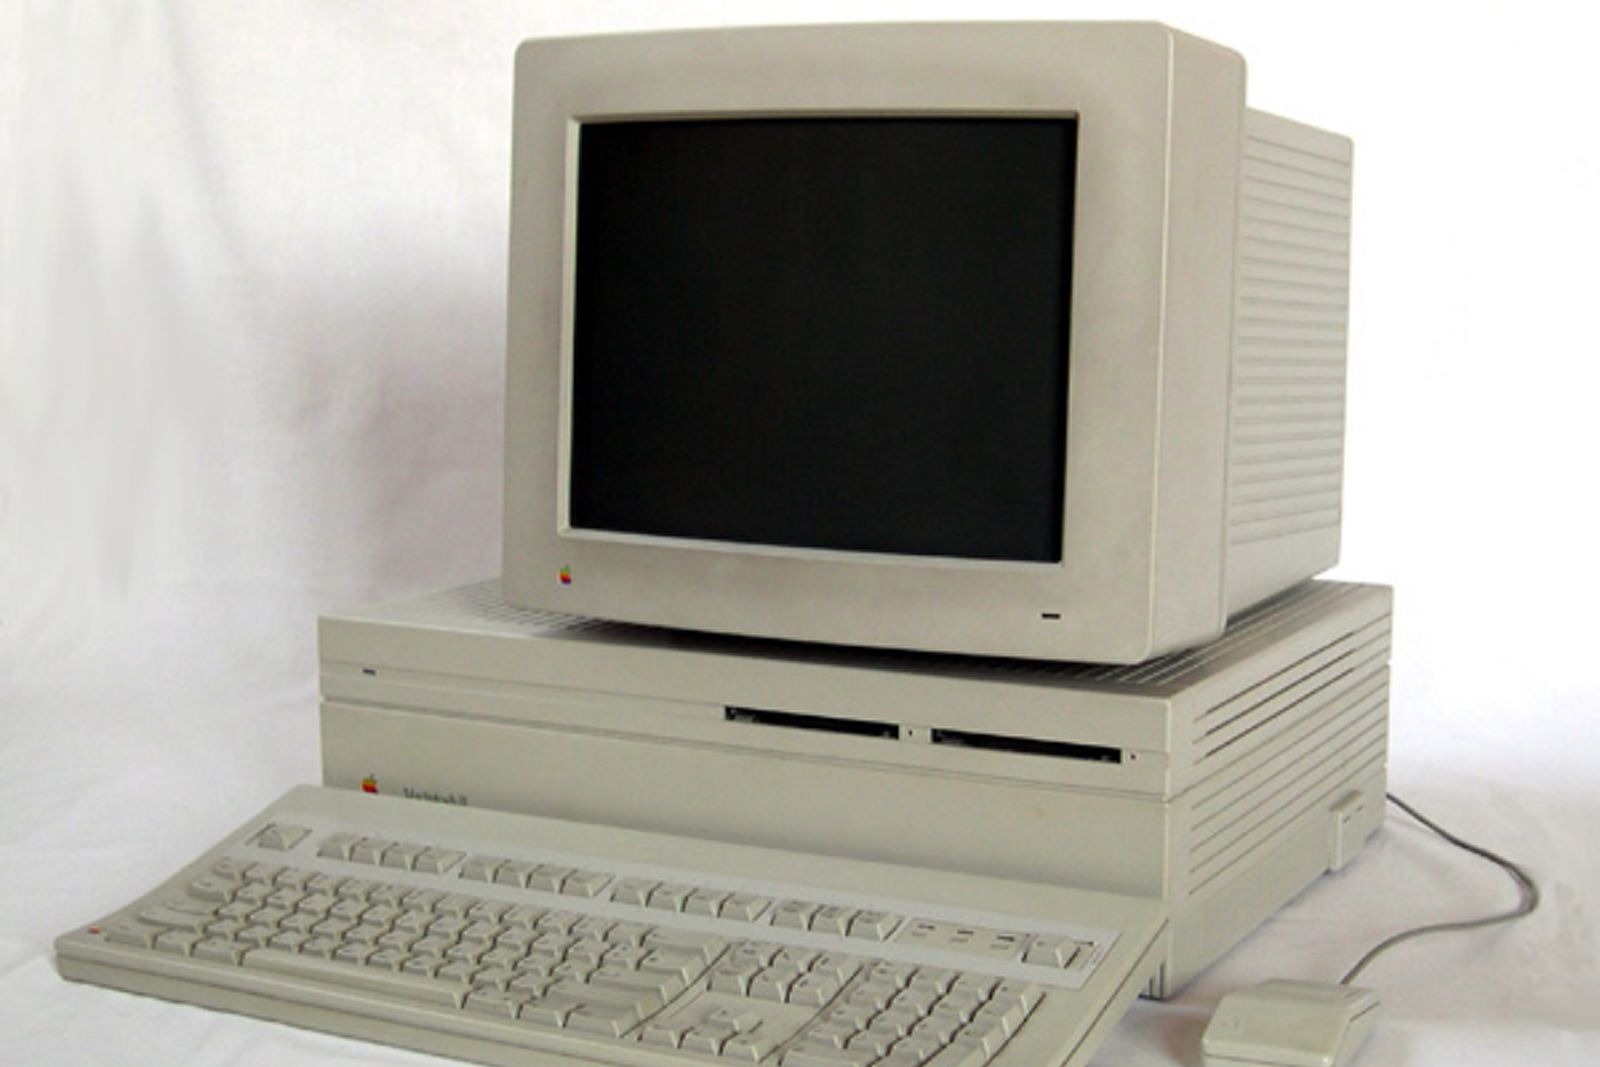 Historic Apple Mac Computers - Walk Down Memory Lane With These Classic Machines image 3